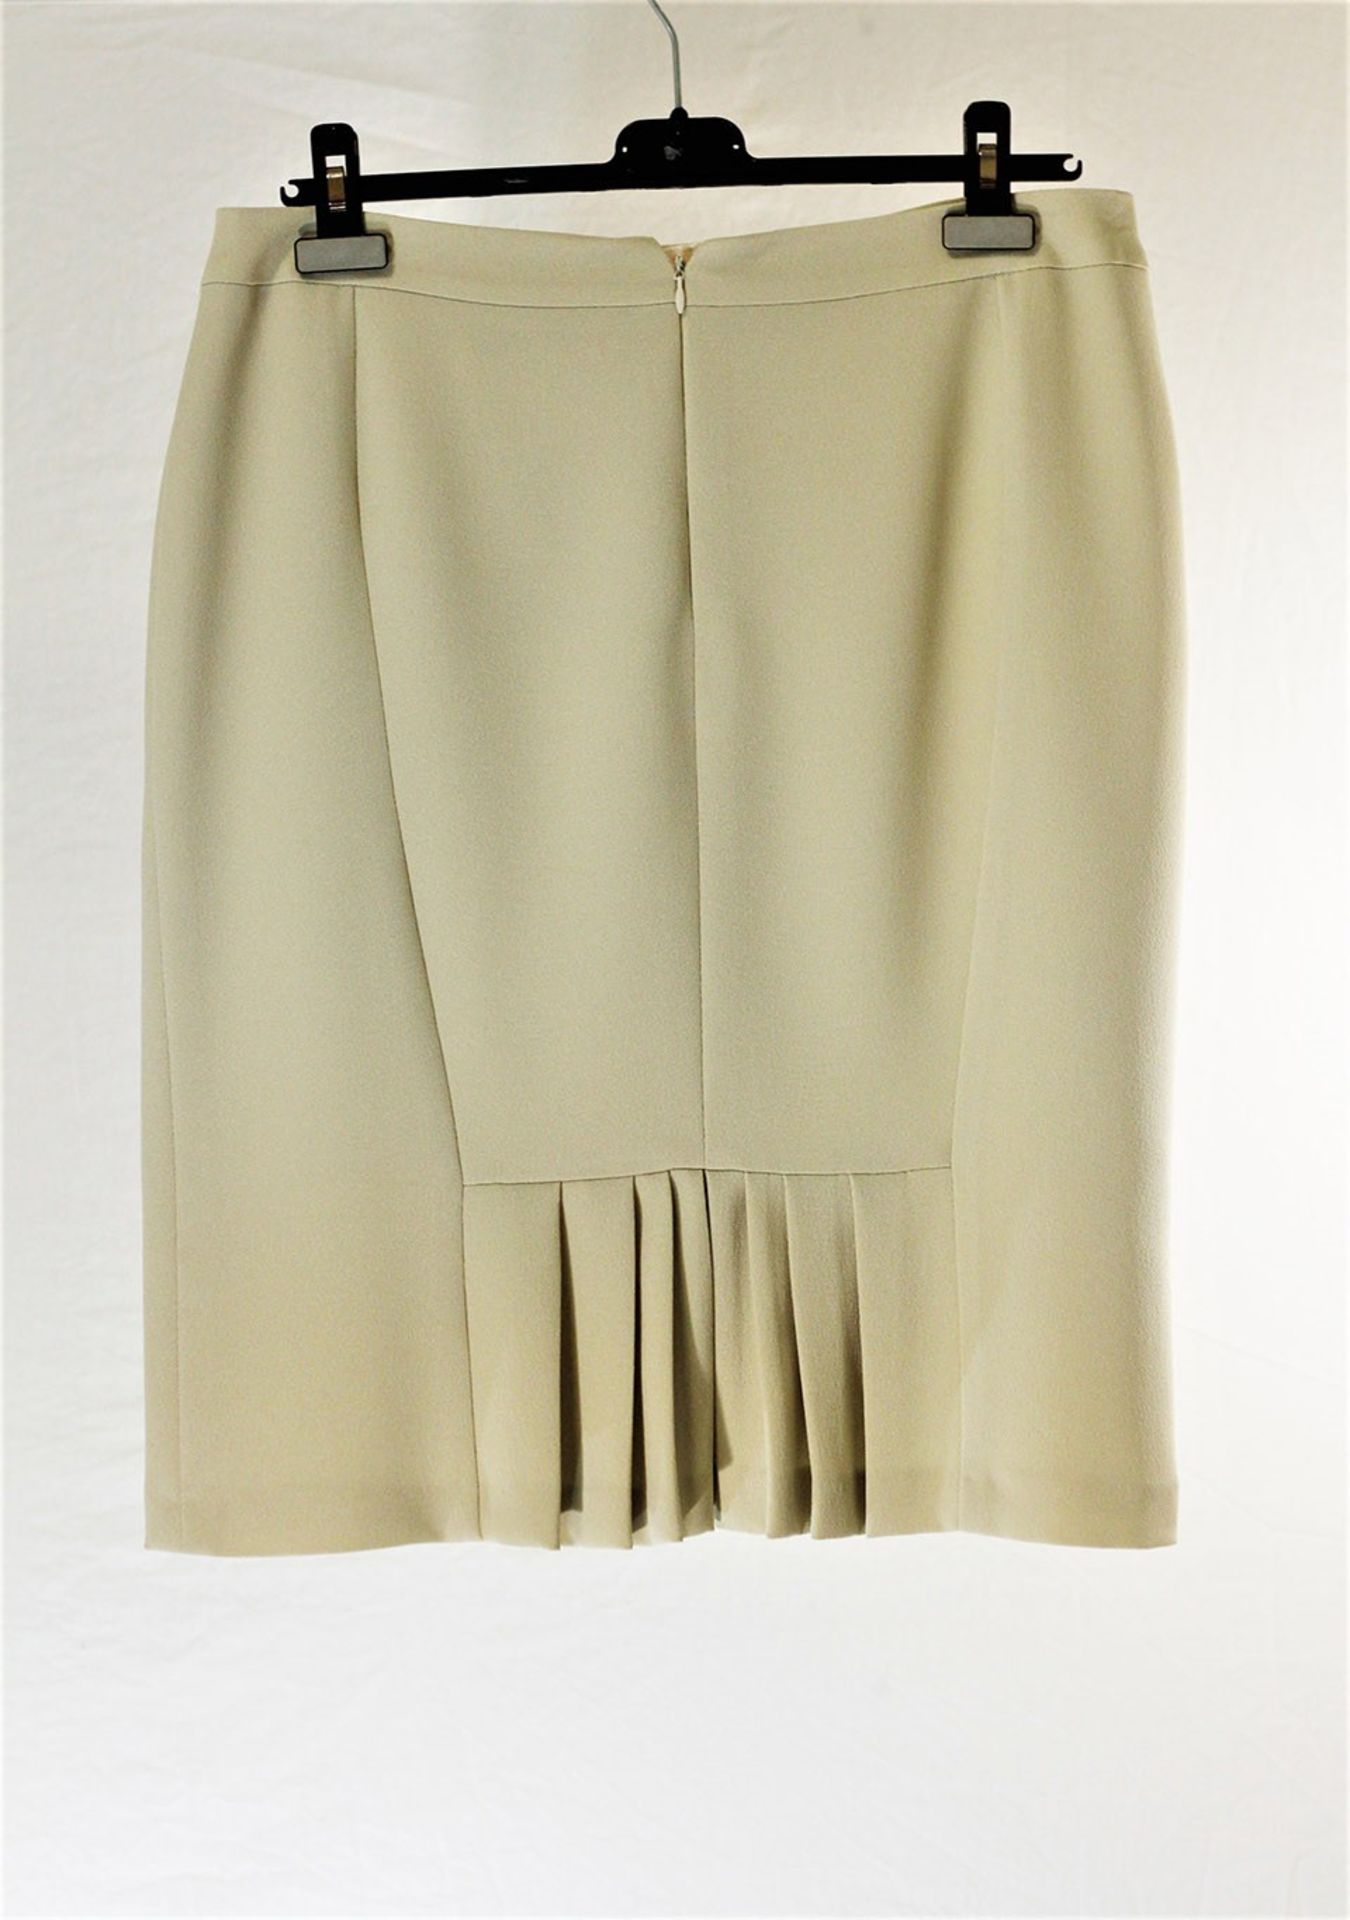 1 x Anne Belin Pistachio Skirt - Size: 20 - Material: 100% Polyester - From a High End Clothing - Image 2 of 12